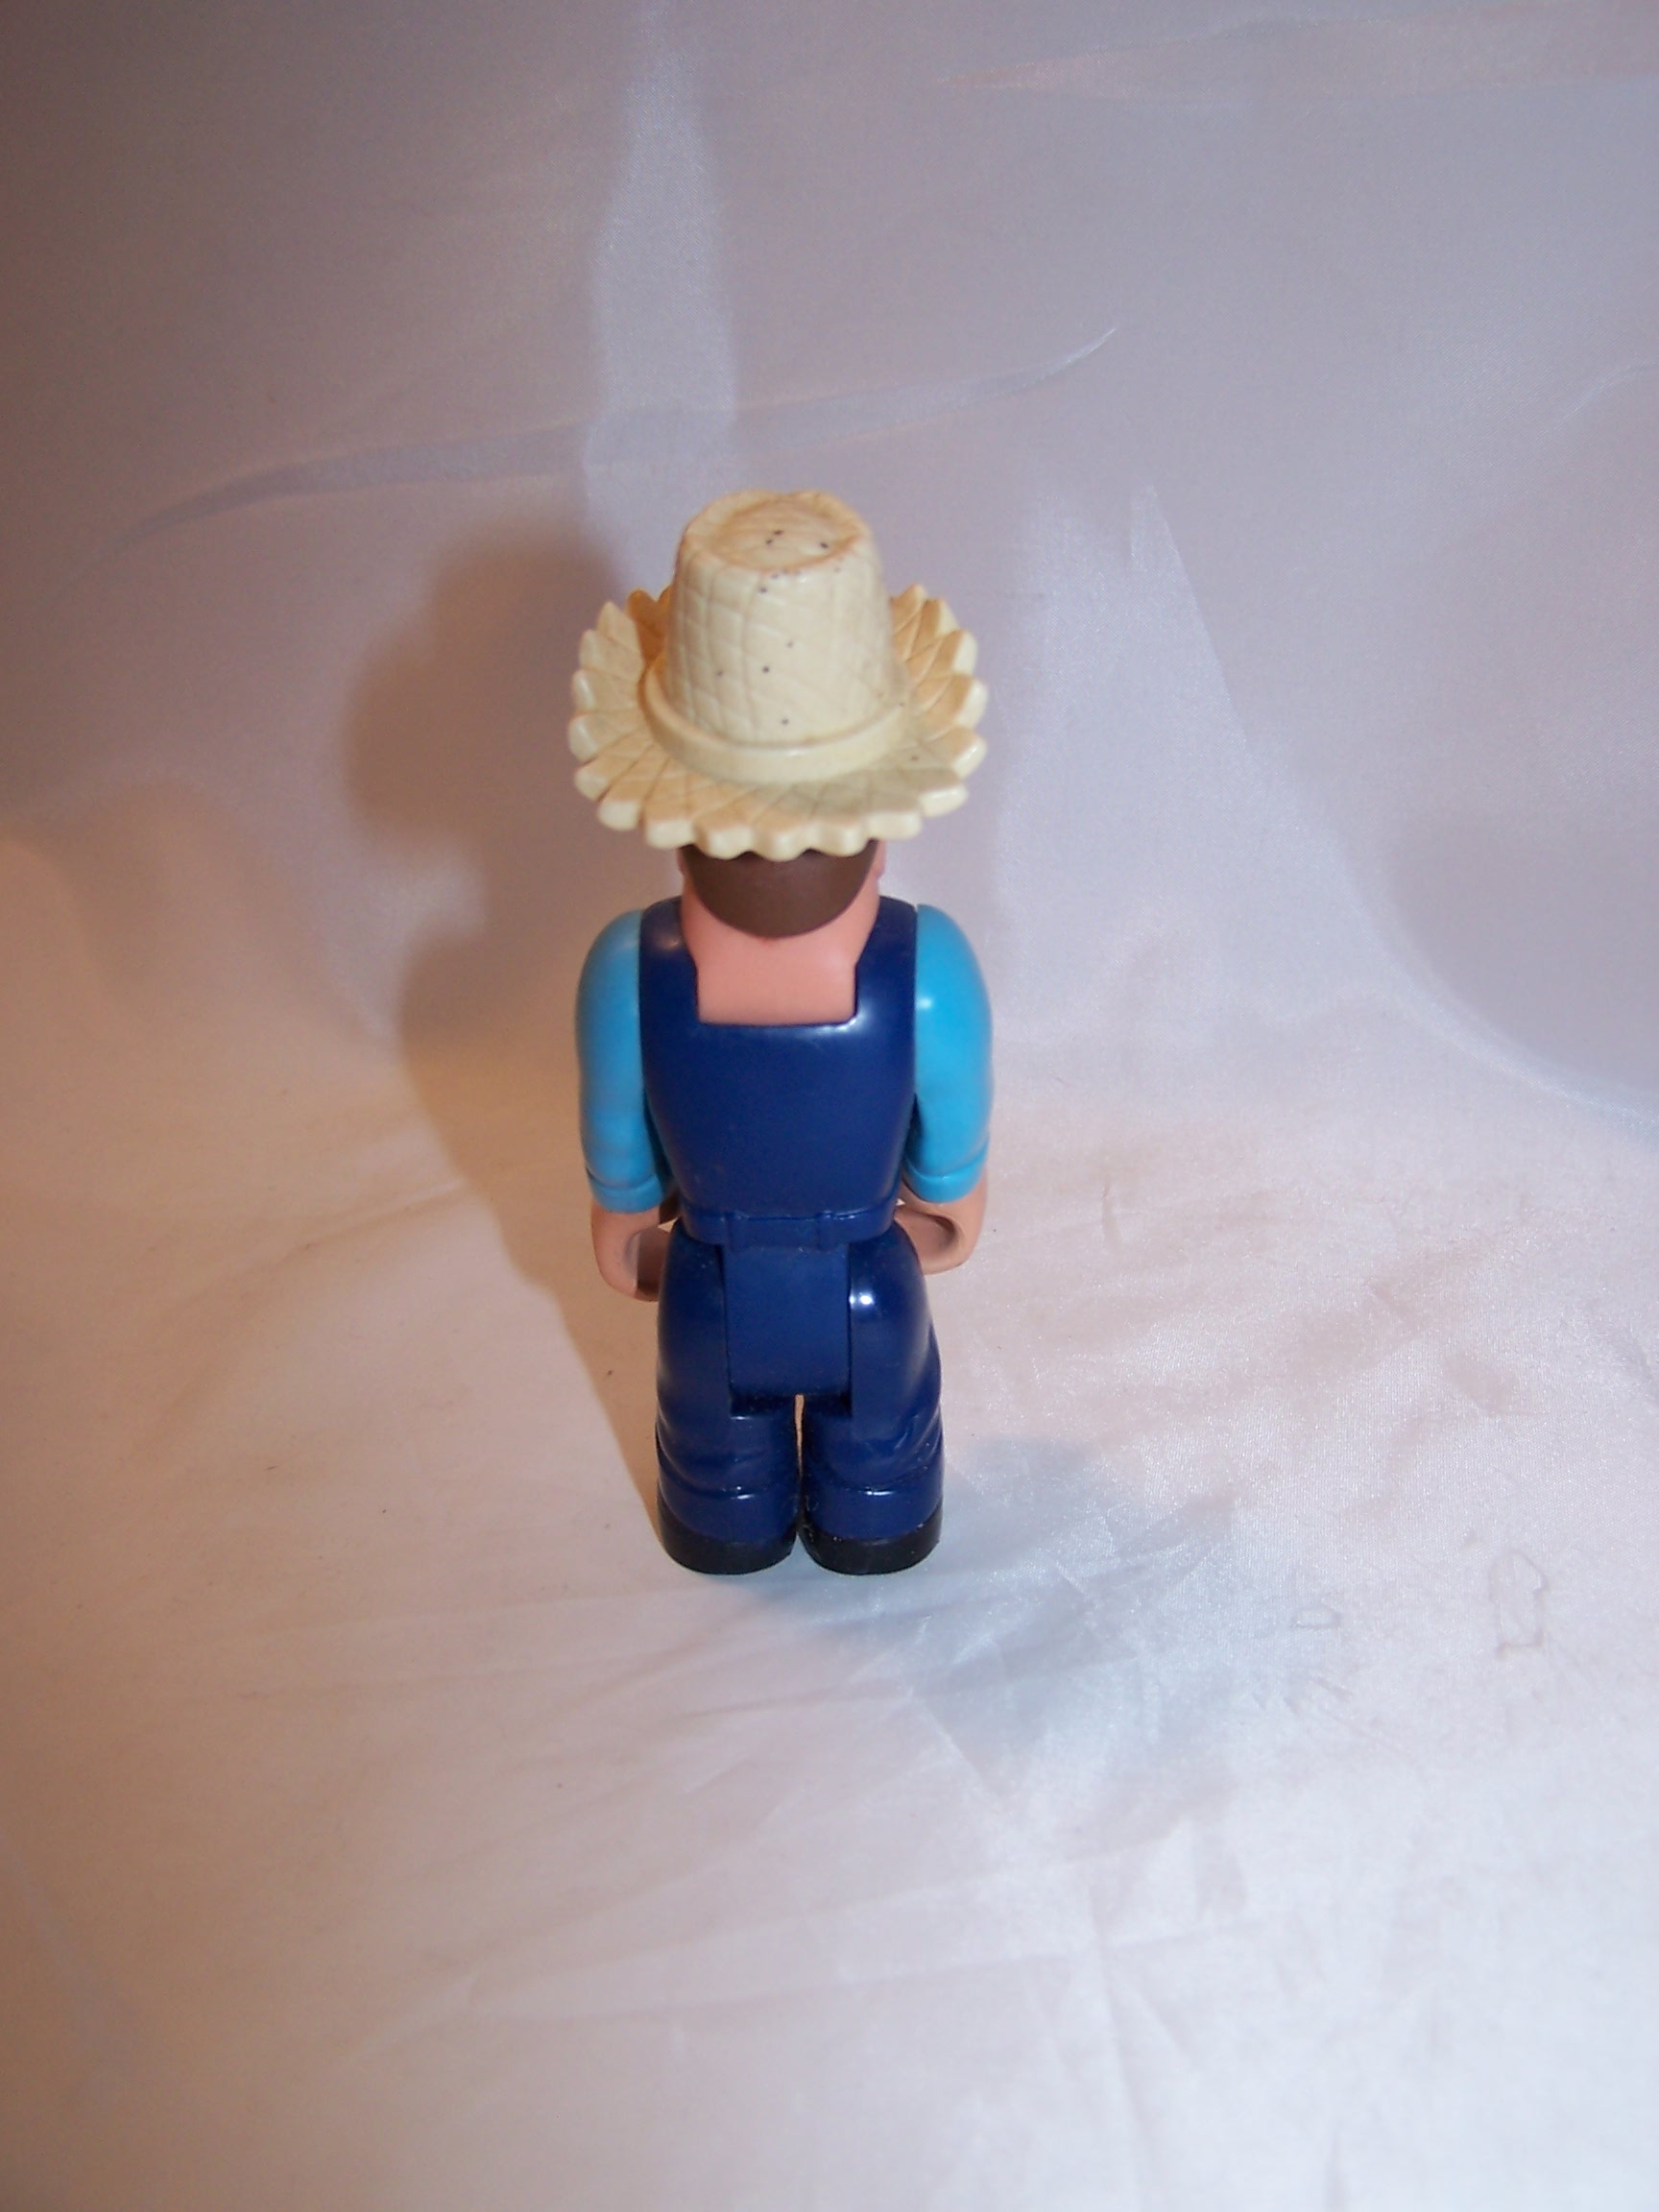 Image 2 of Farmer w Hat, Jointed, Plastic